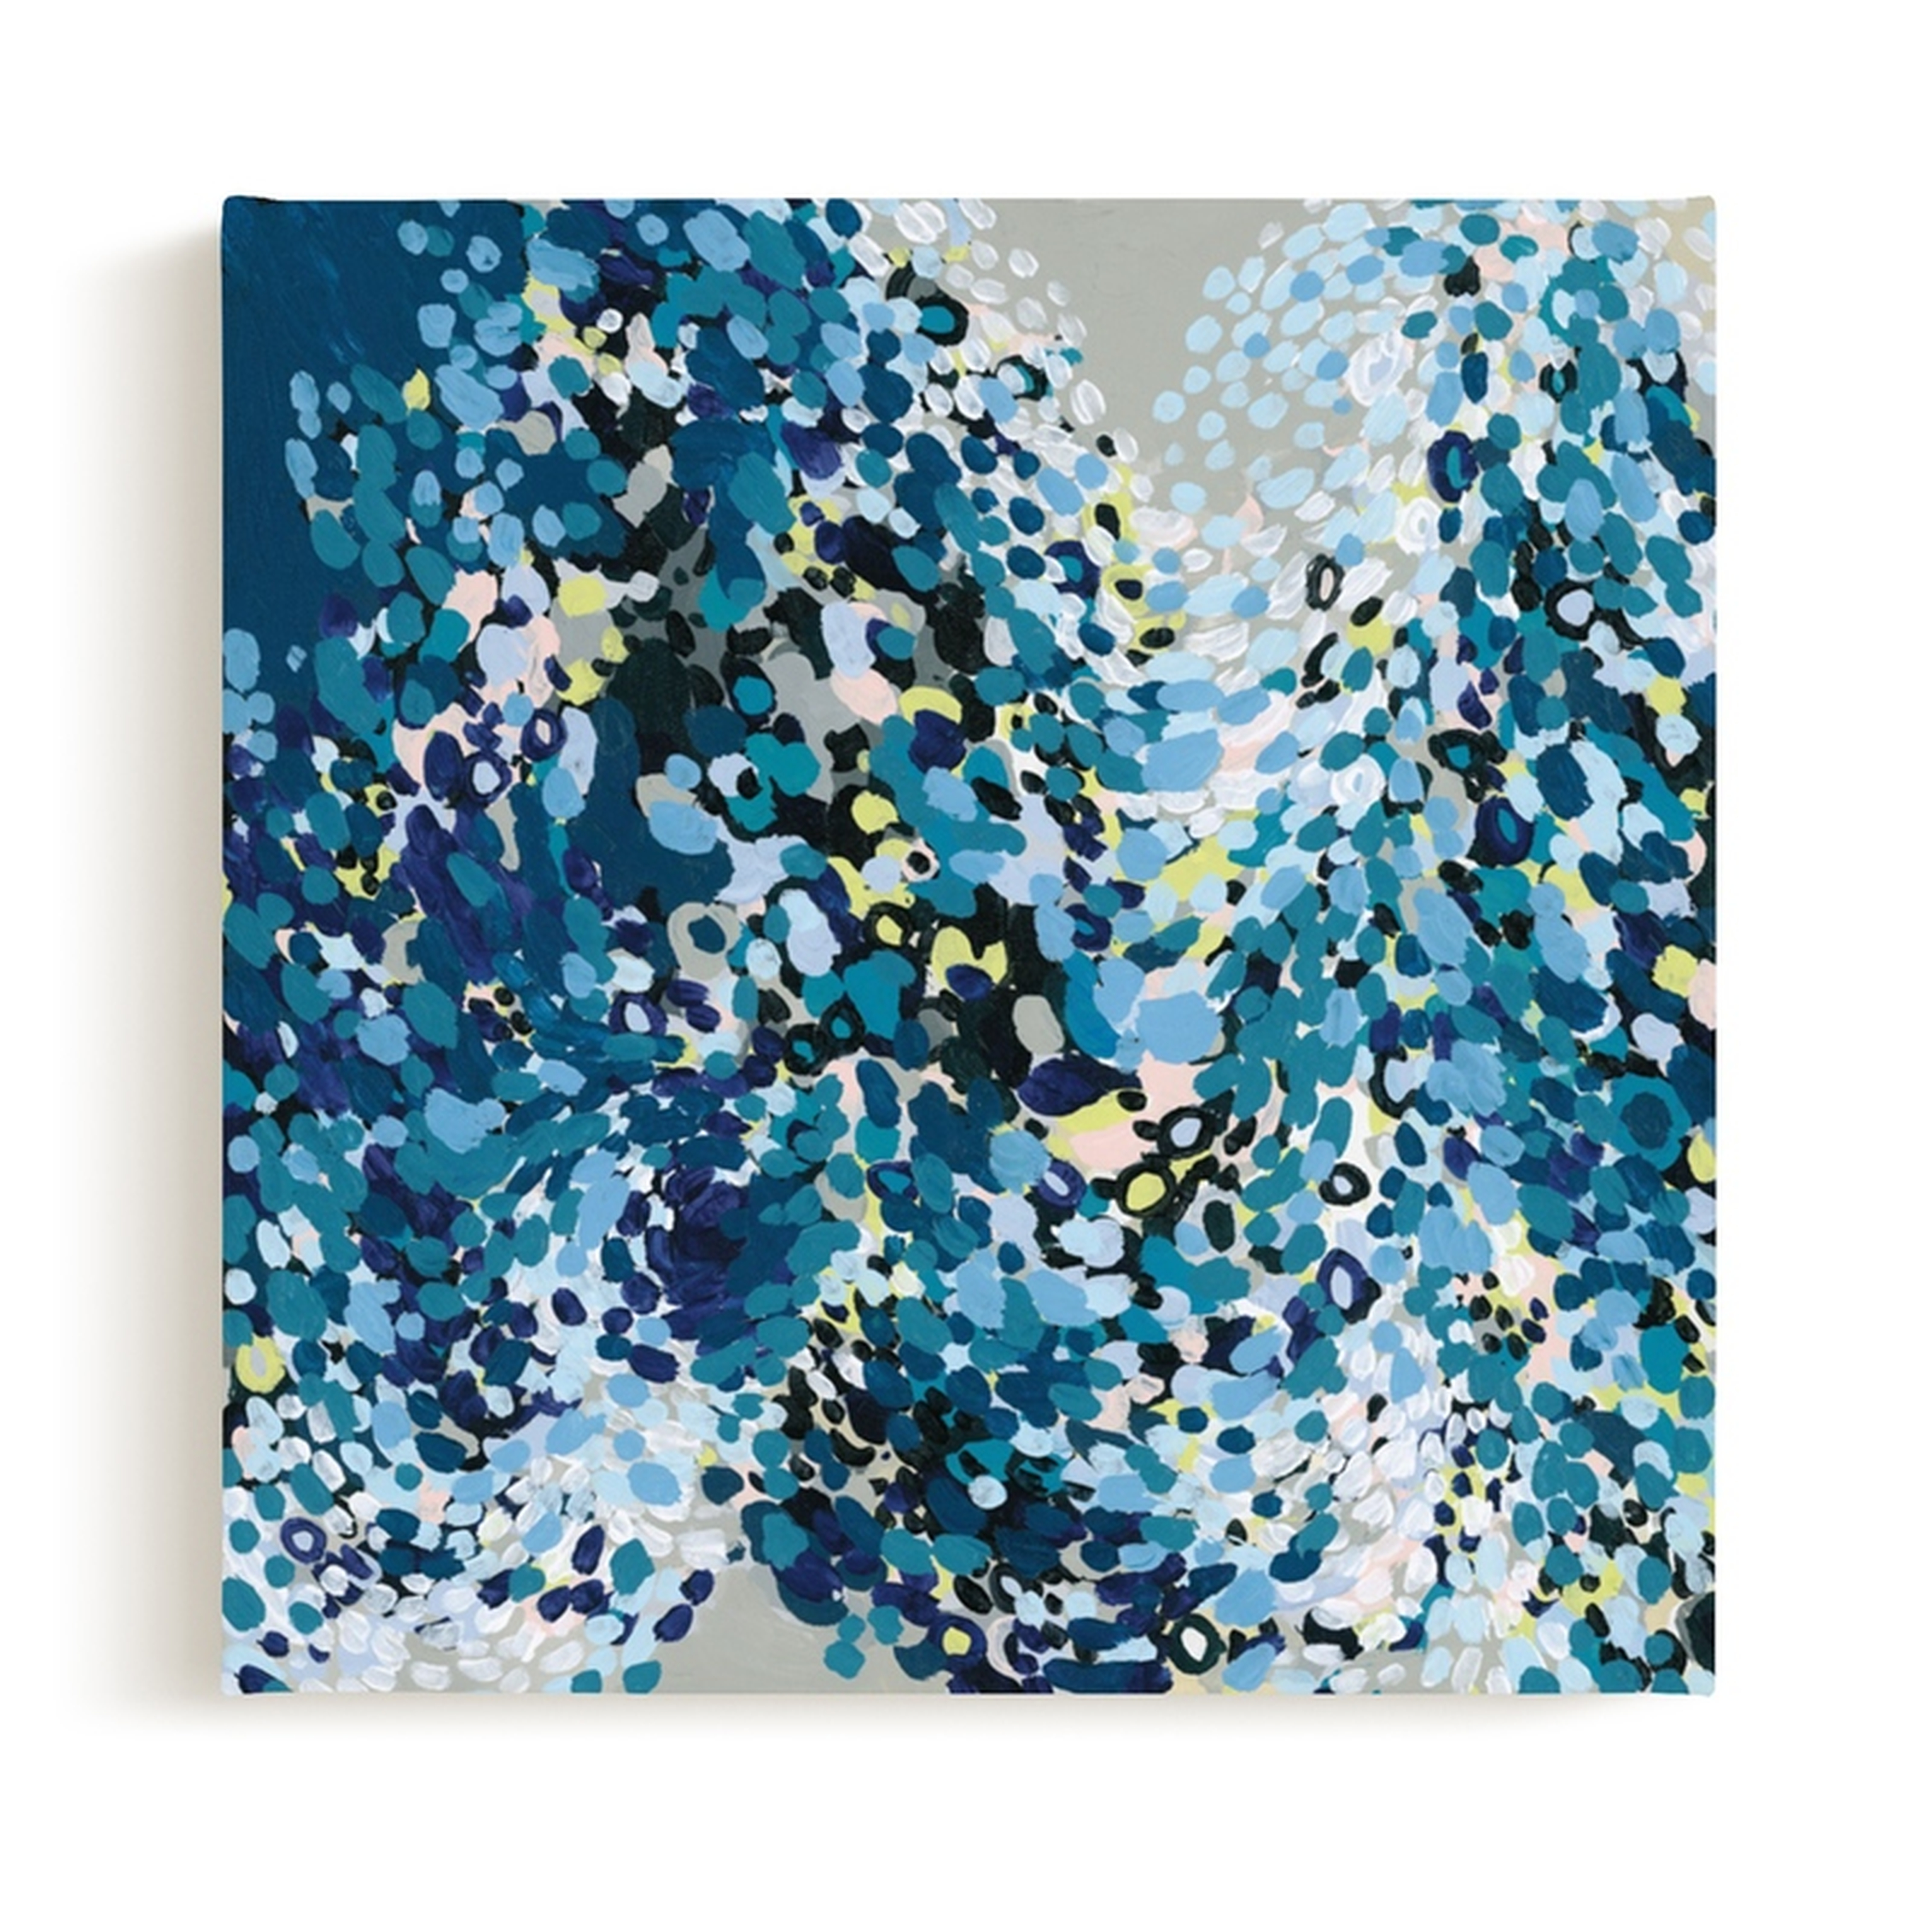 Dance in Bluec LIMITED EDITION ART - 16 x 16 -CANVAS - Minted